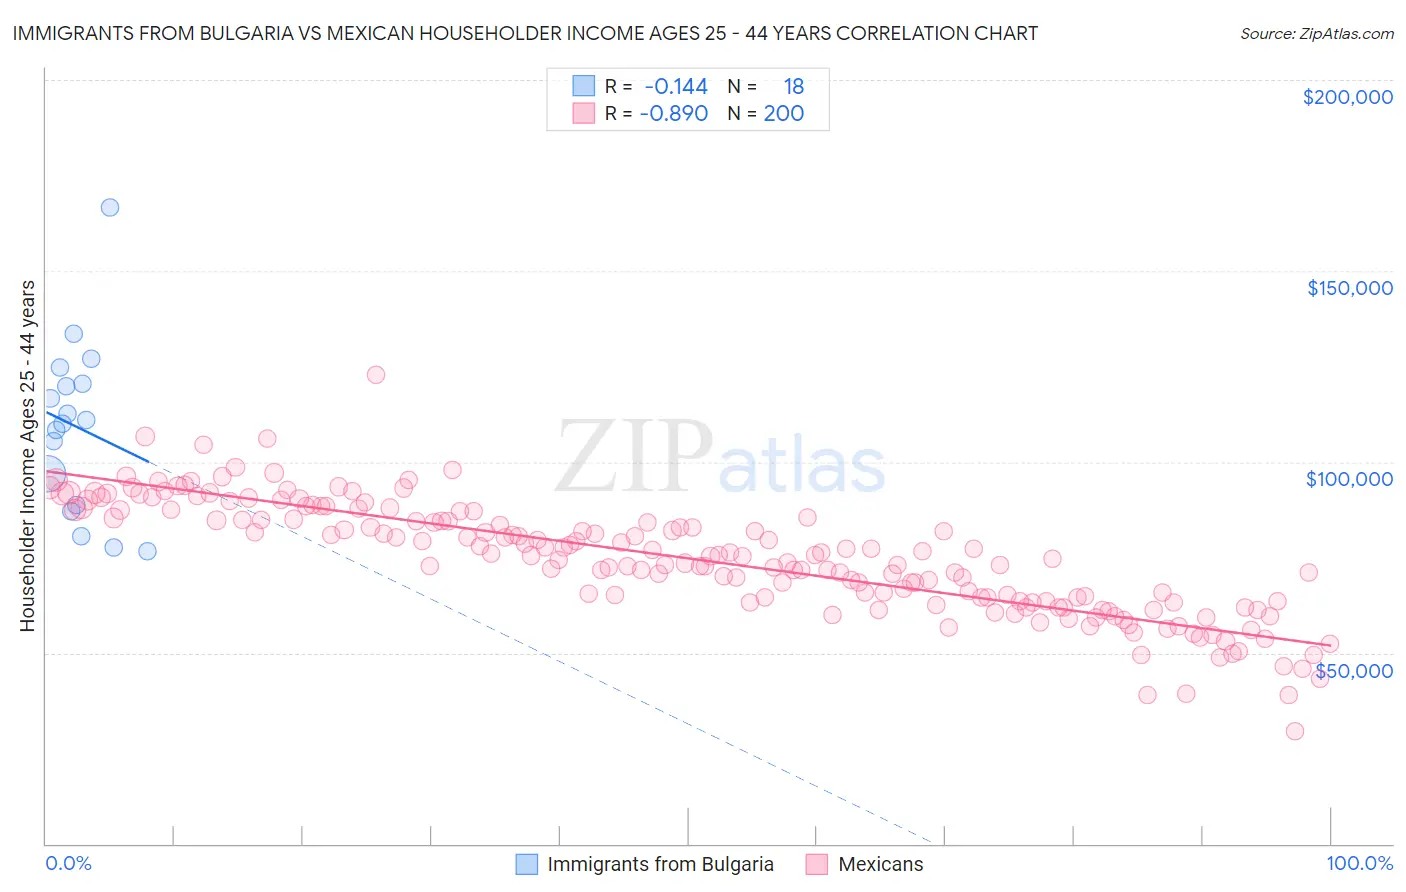 Immigrants from Bulgaria vs Mexican Householder Income Ages 25 - 44 years